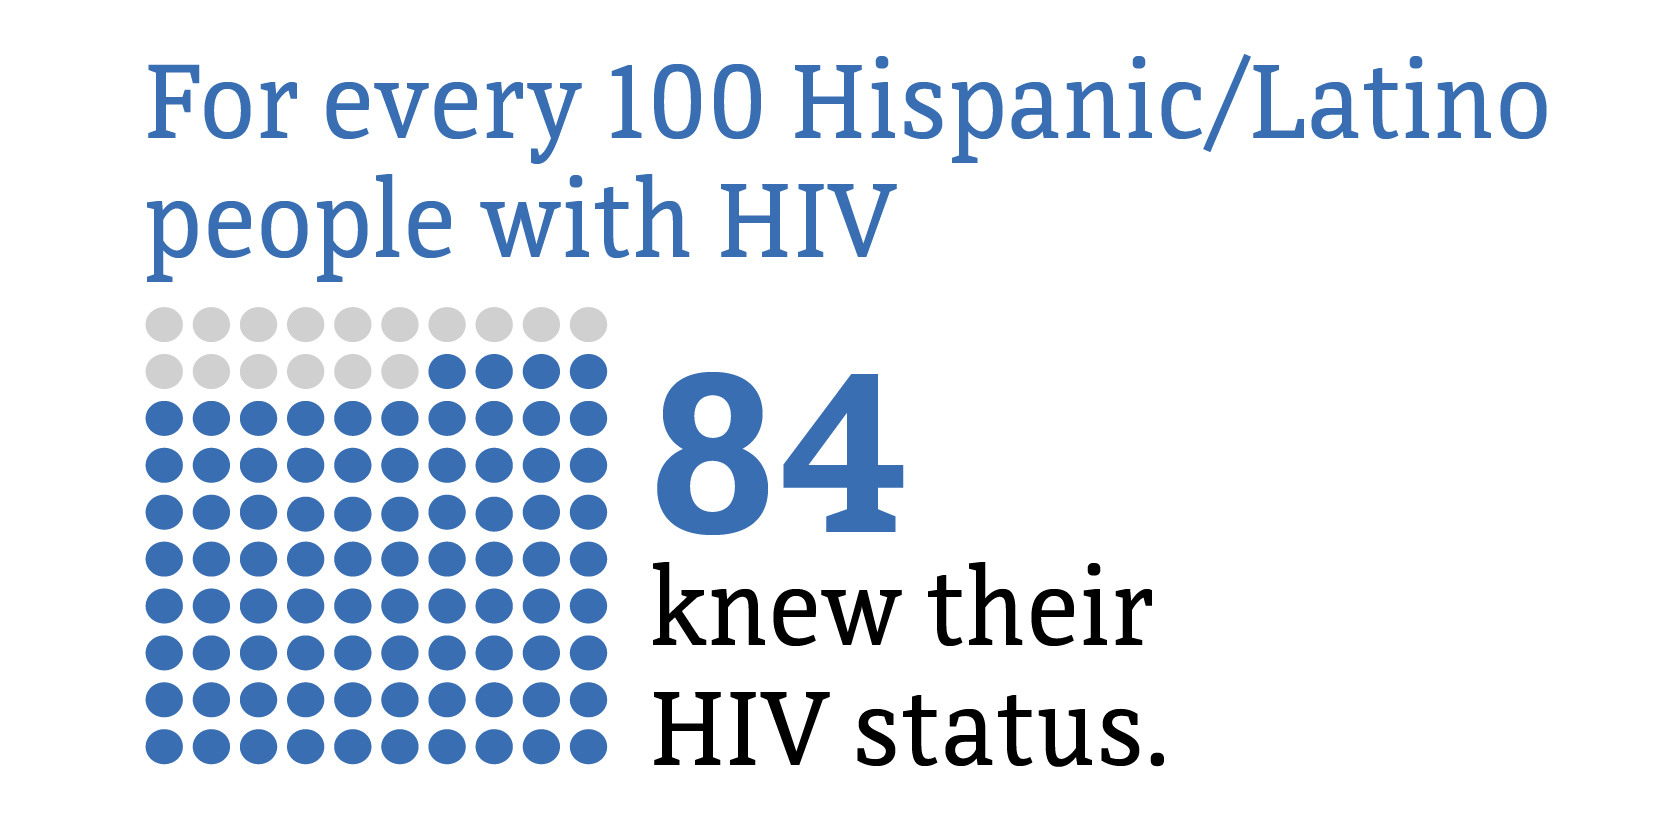 This chart shows in 2019, for every 100 Hispanic/Latino people with HIV, 84 knew their HIV status.